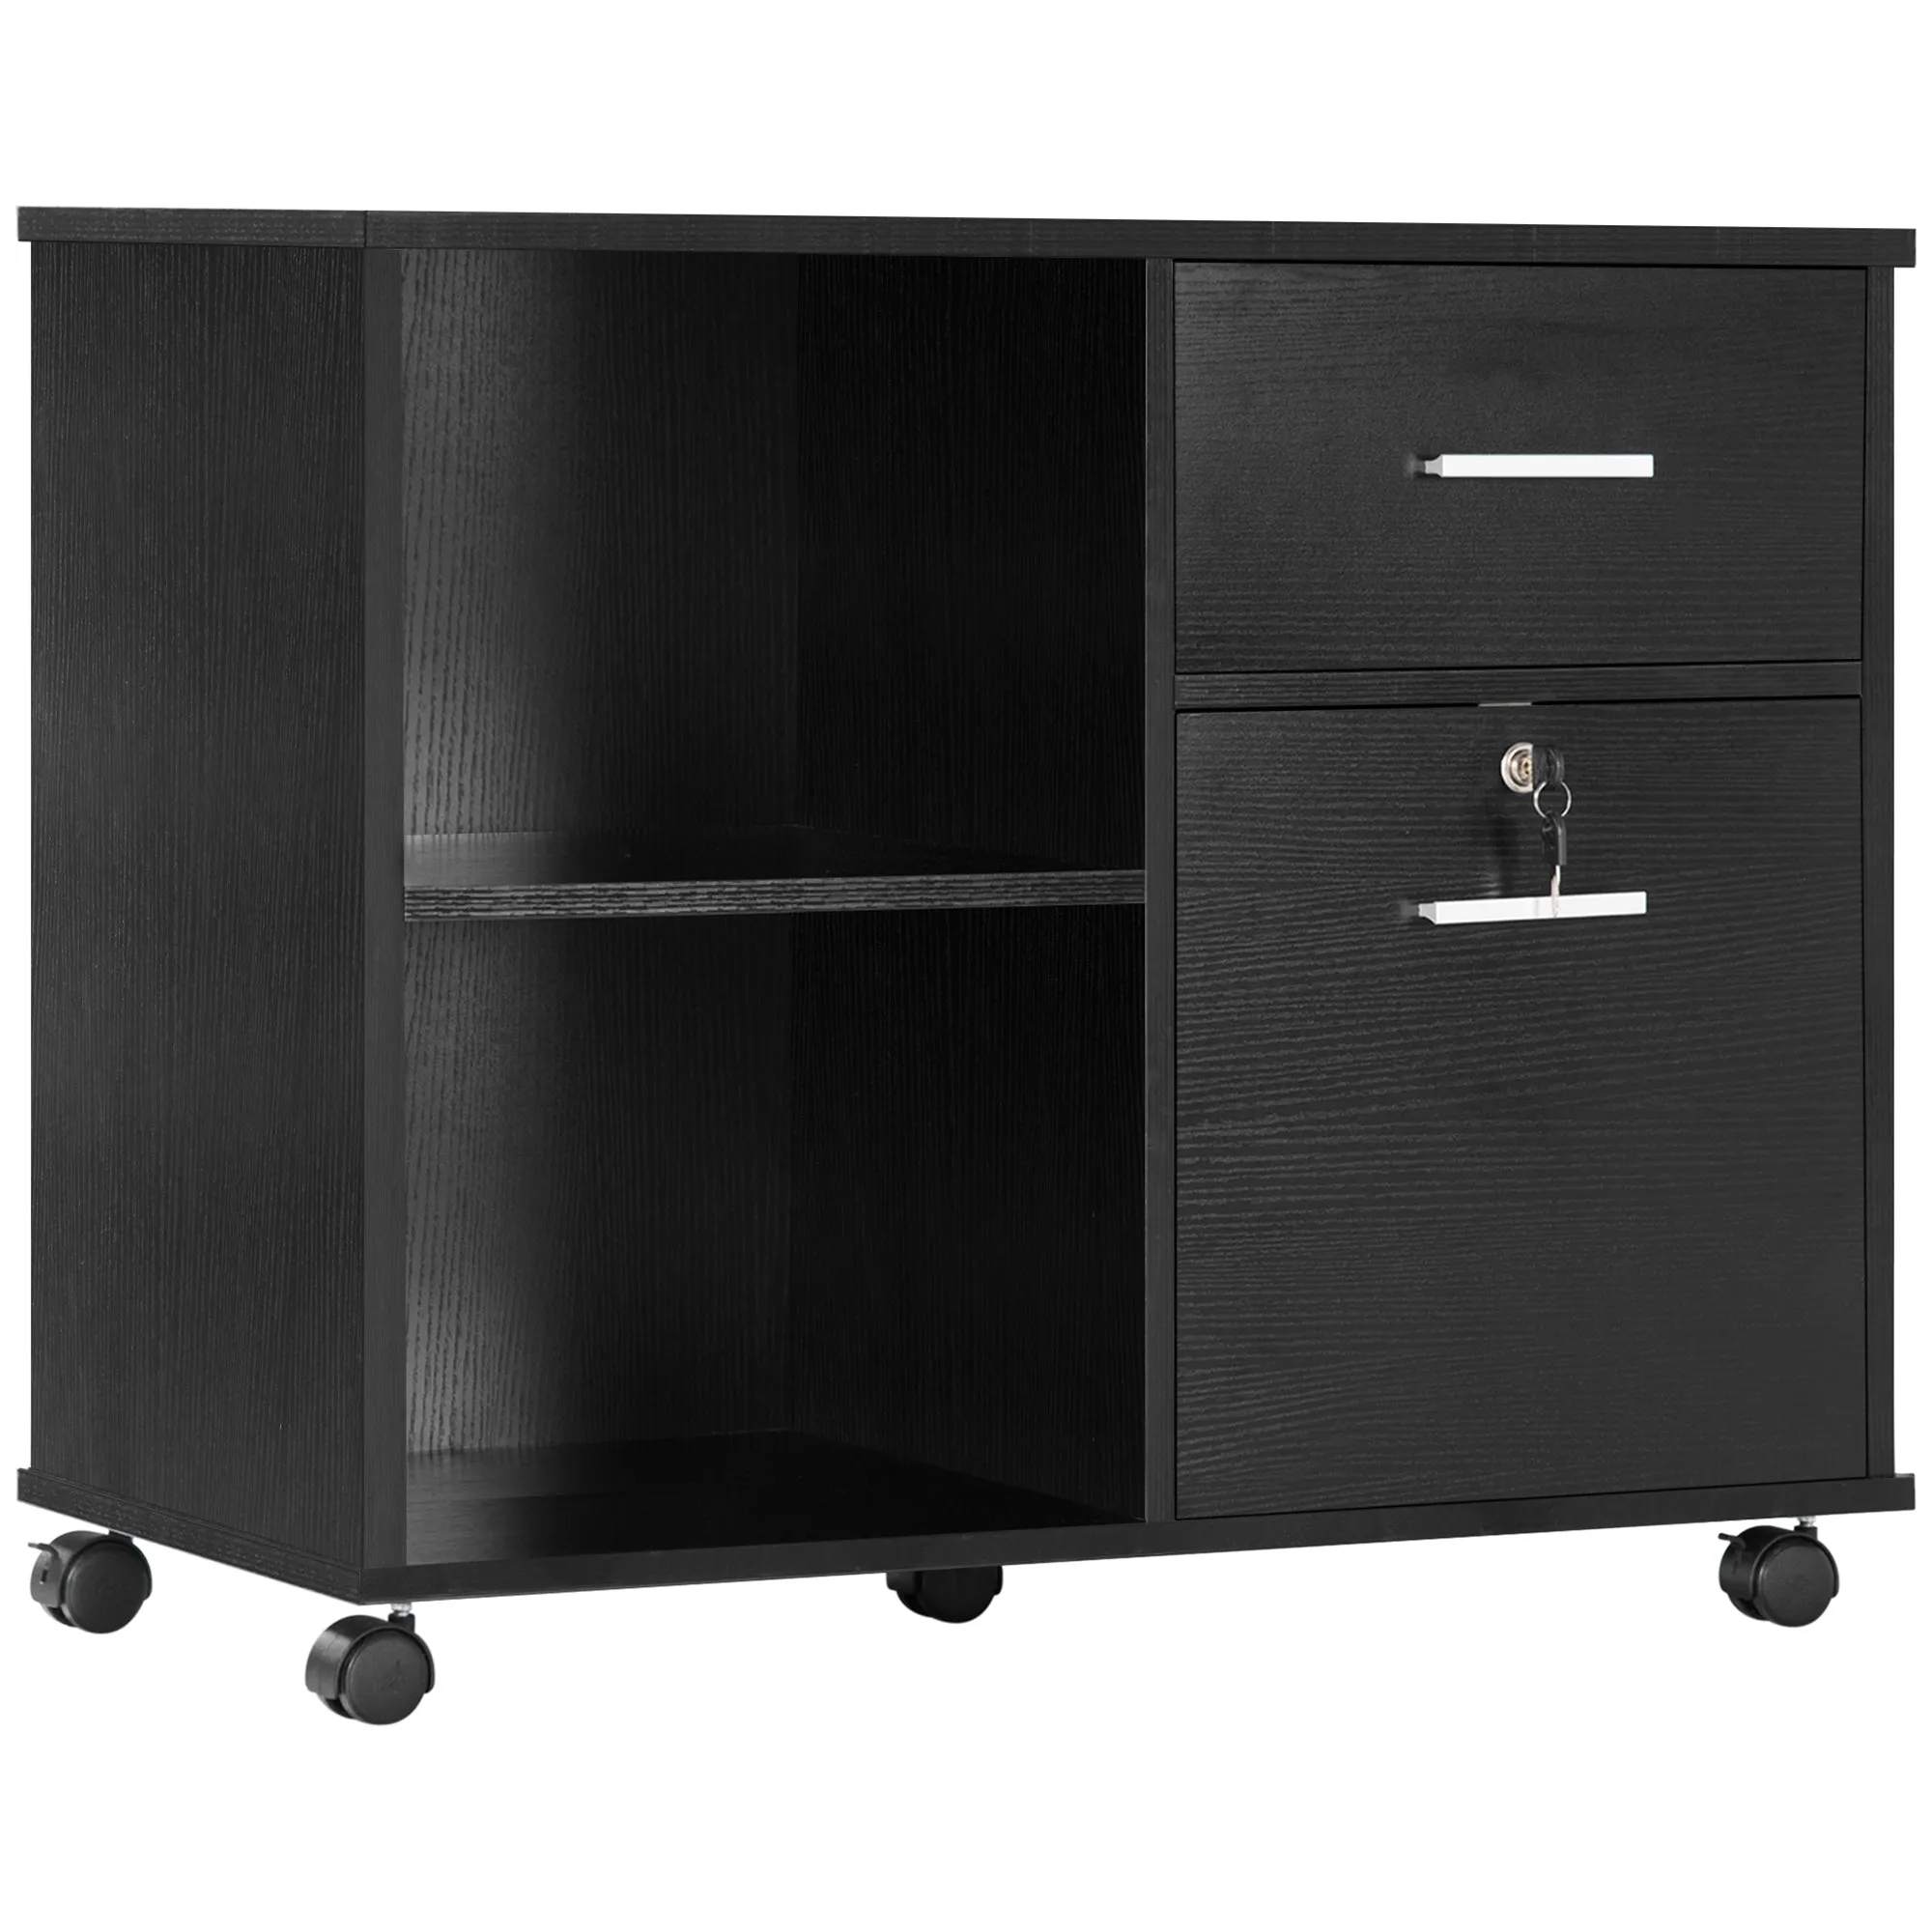 Black Mobile File Cabinet: Lateral file cabinet with wheels, mobile printer stand, open shelves, and drawers for A4 size documents.